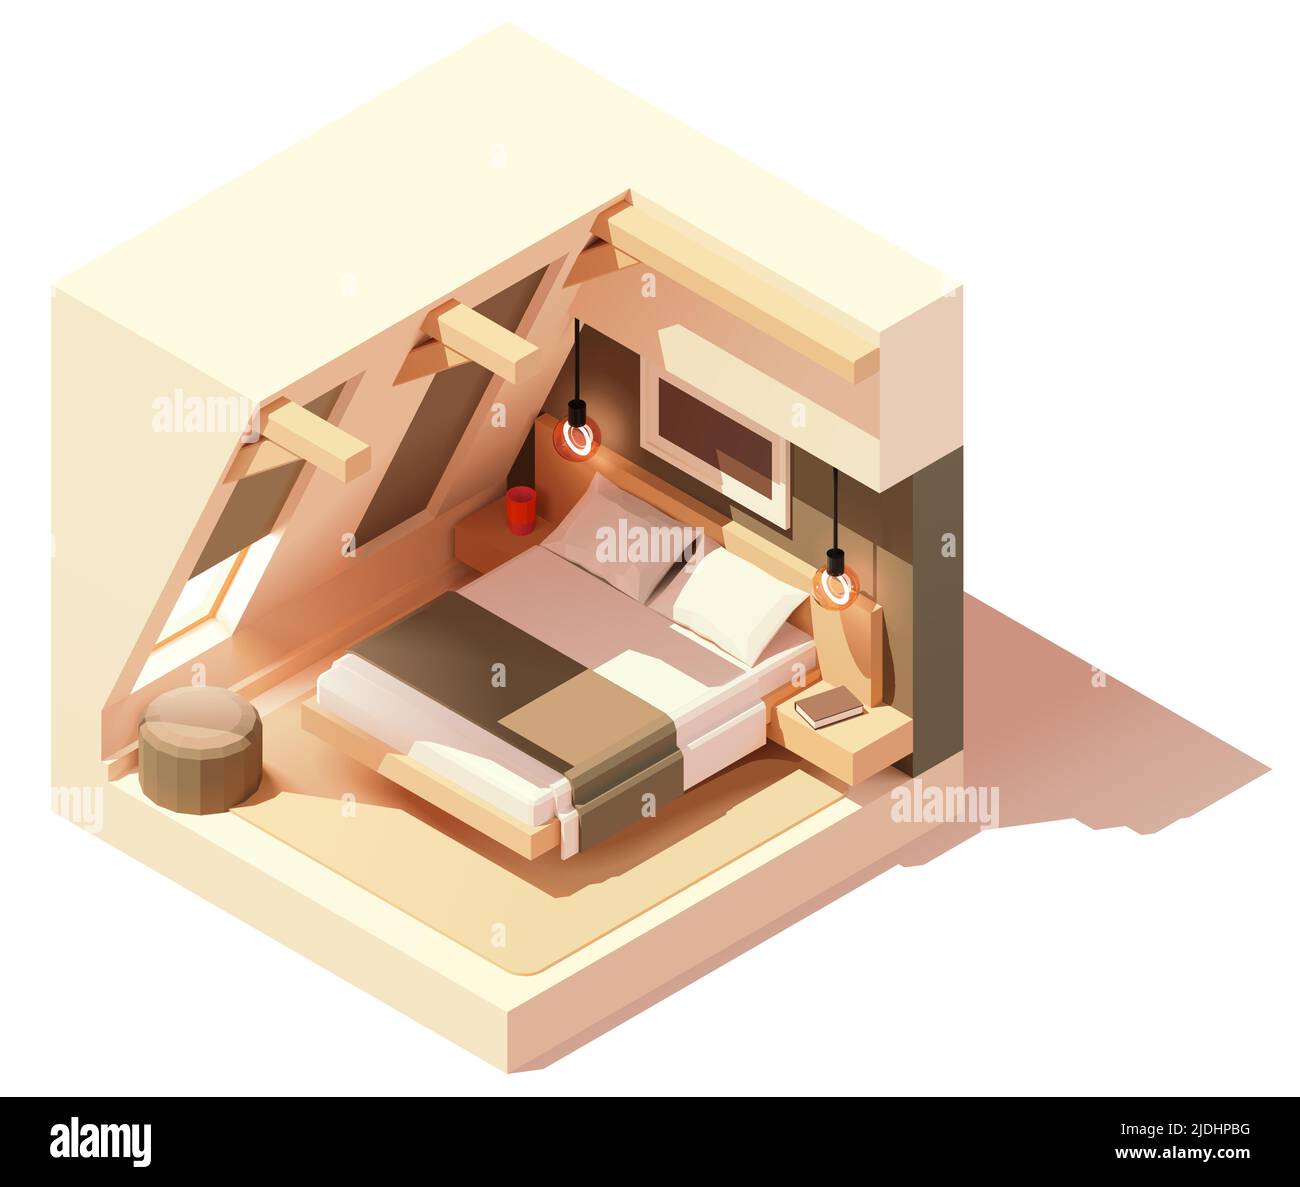 Vector isometric modern attic bedroom interior. Room with sloped ceiling. Double bed, chair and night lamps. Low poly cross-section illustration Stock Vector